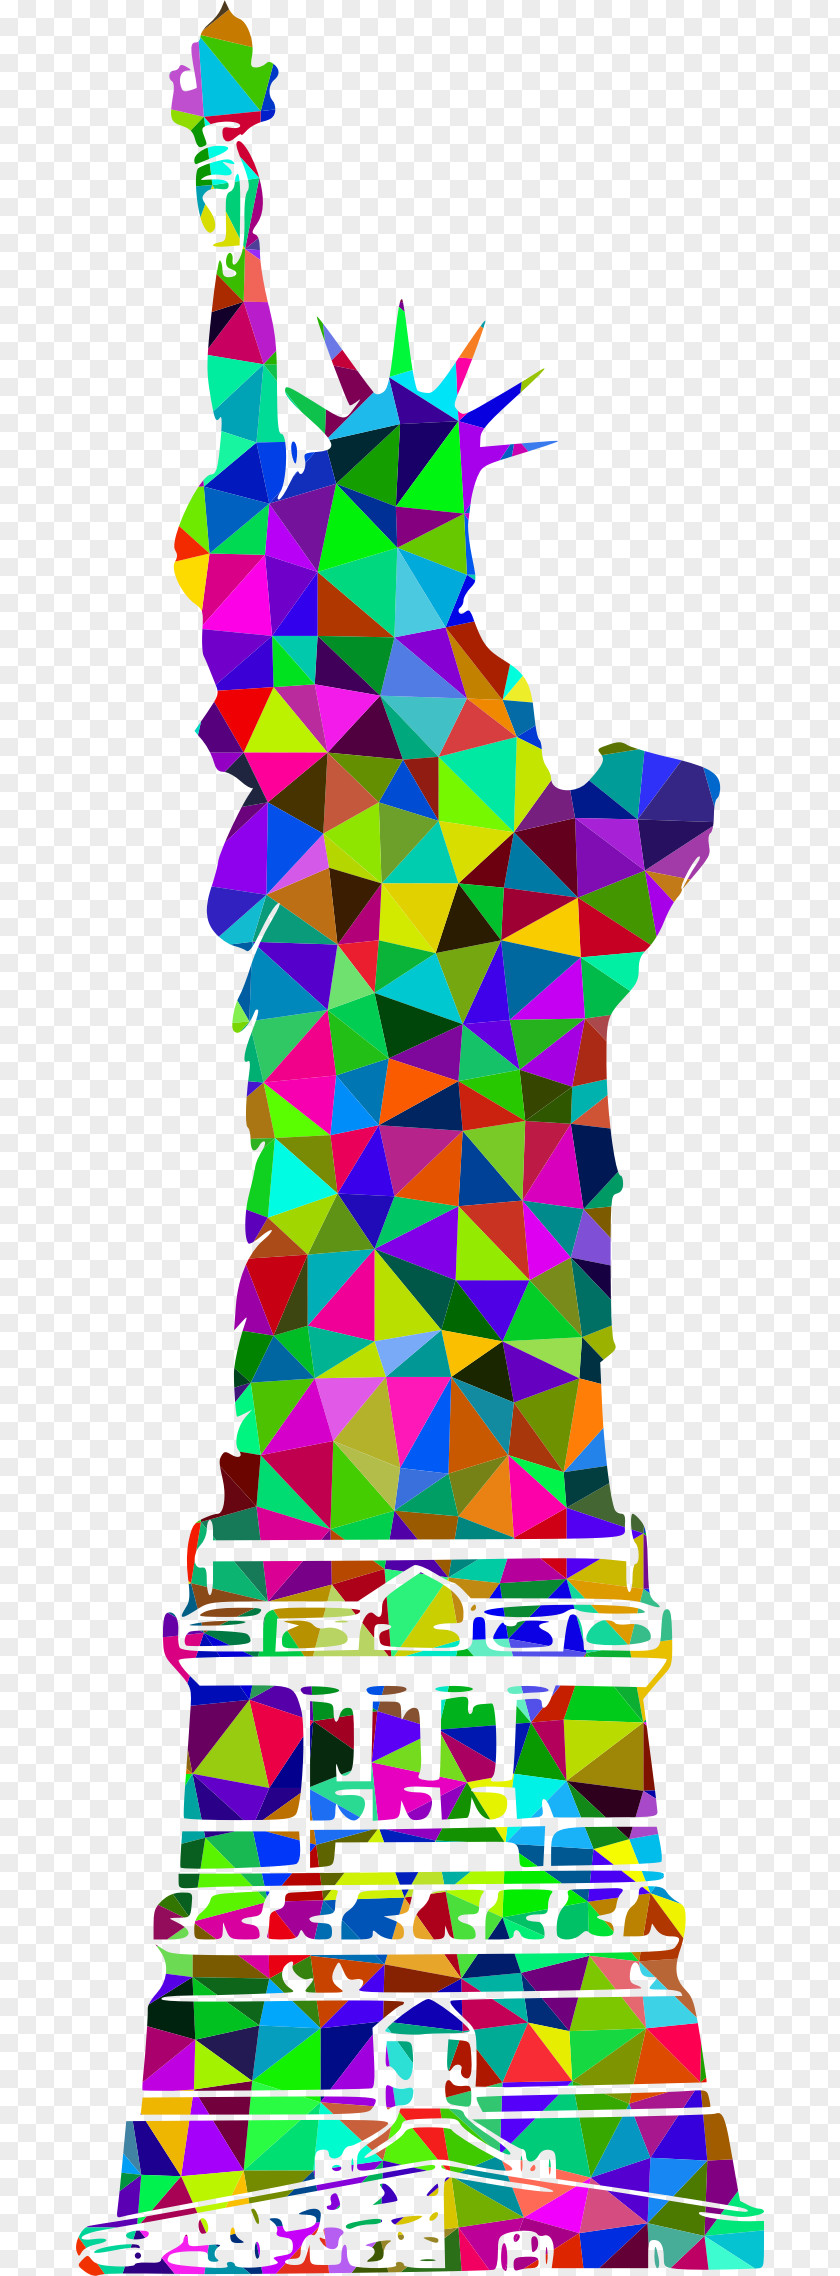 Statue Of Liberty Monument Clip Art PNG